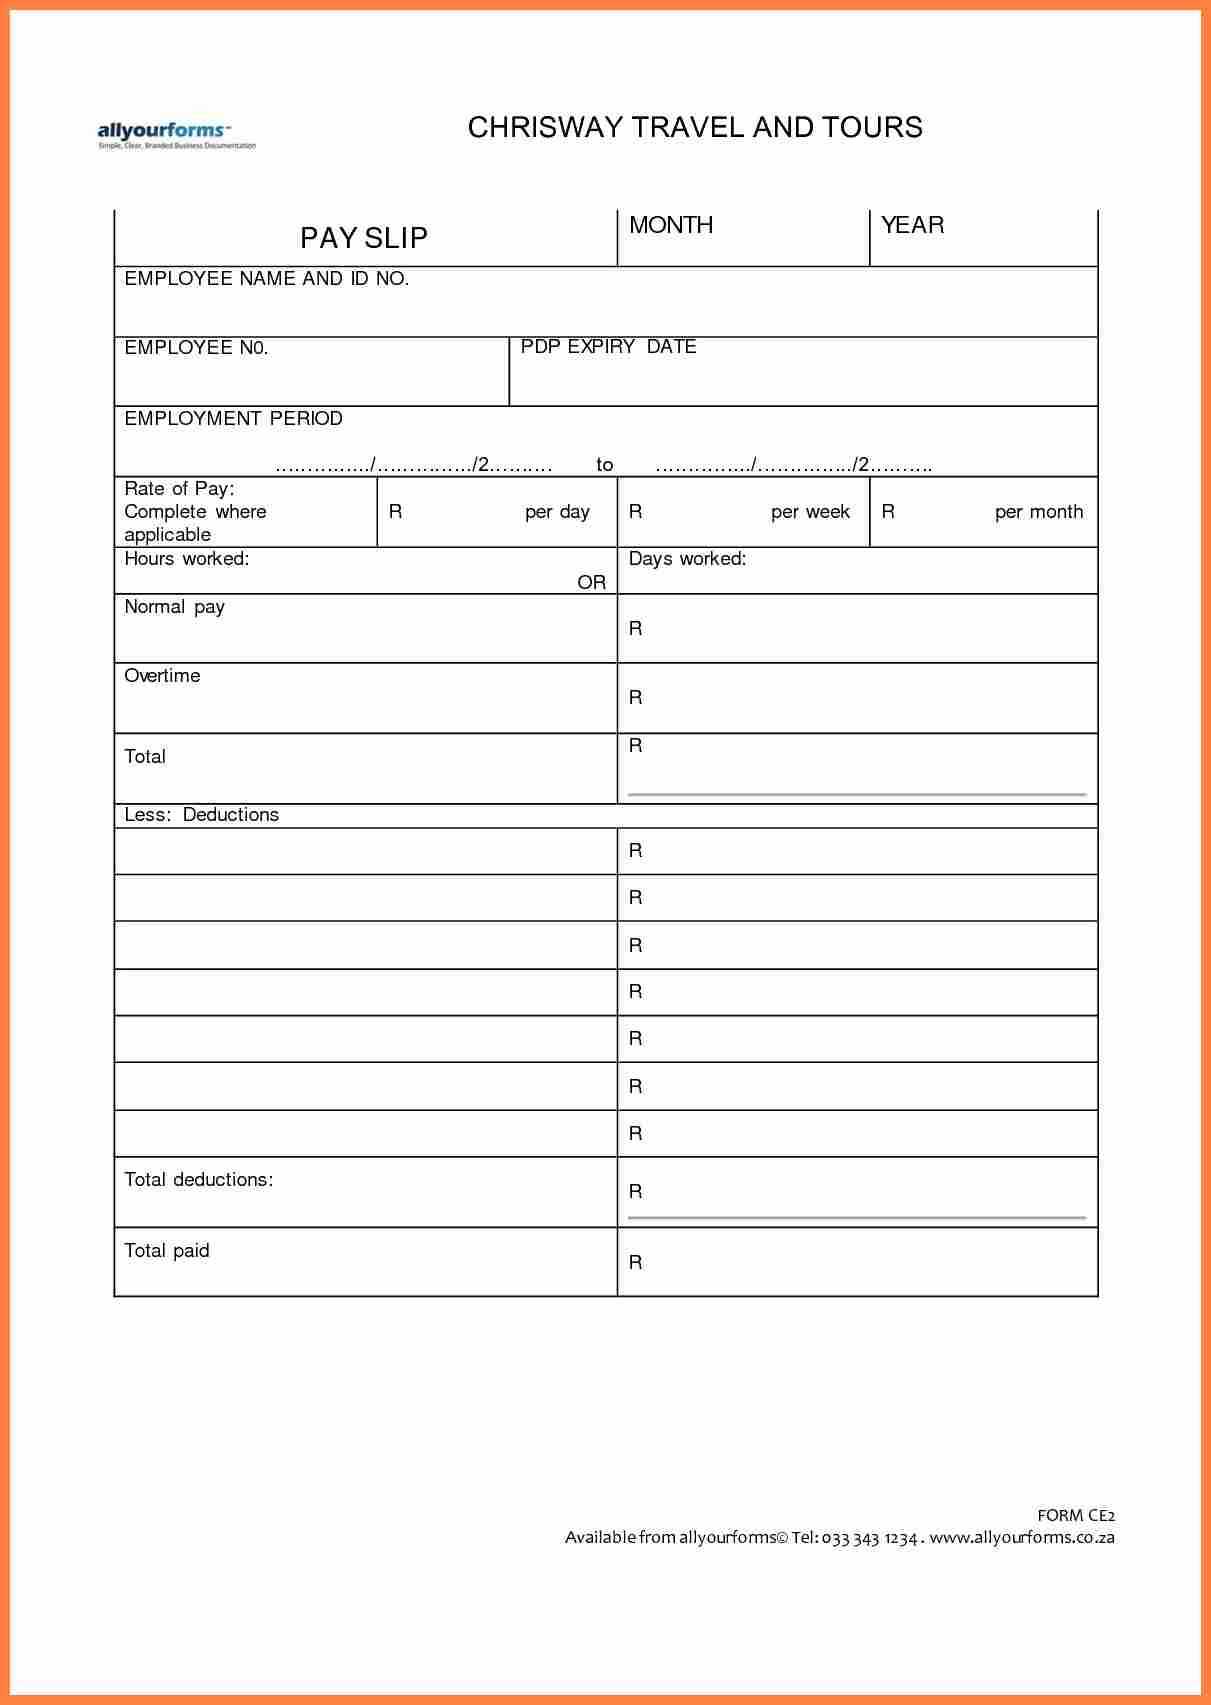 2F7D Payroll Payslip Template | Wiring Library With Blank Payslip Template